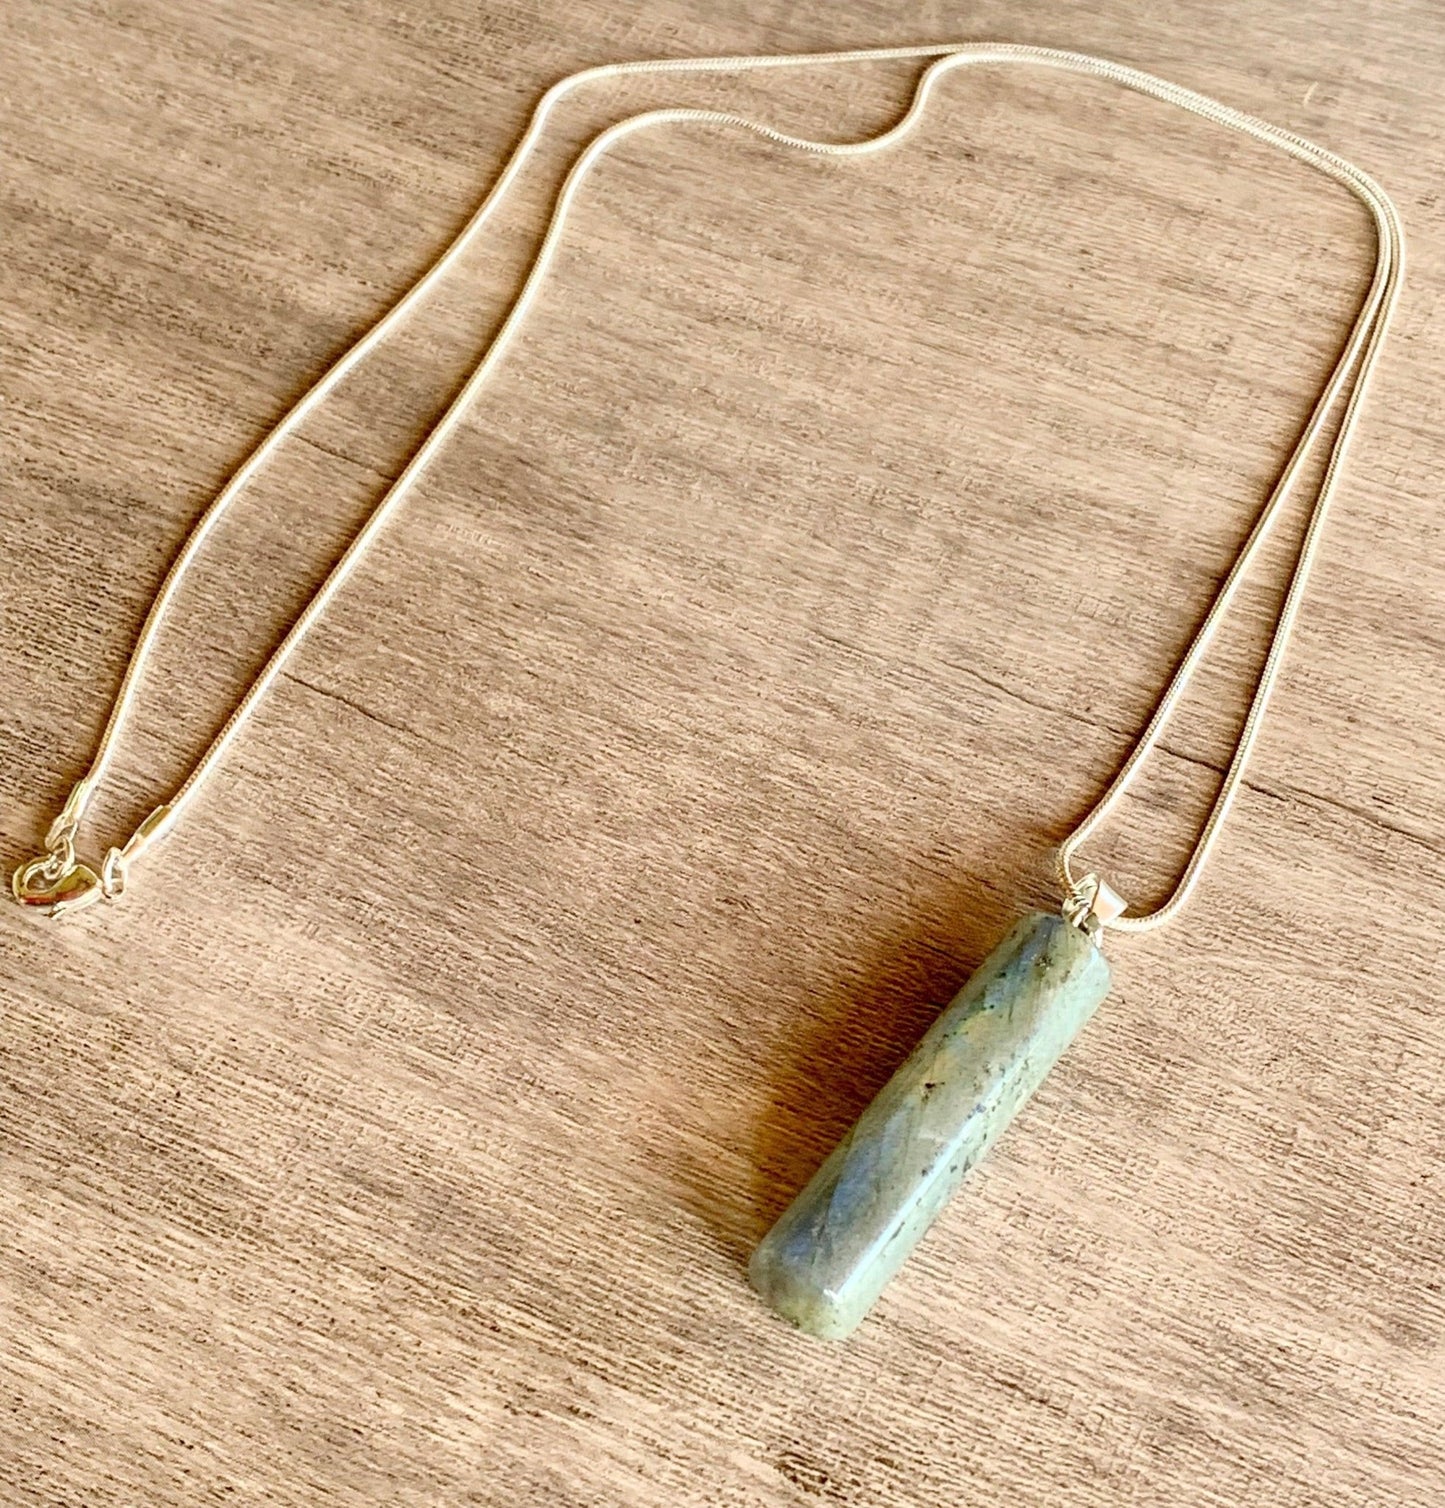 🔴SOLD🔴 Ridge Handcrafted Cylinder Labradorite Pendant on Silver Plated Snake Chain - Born Mystics